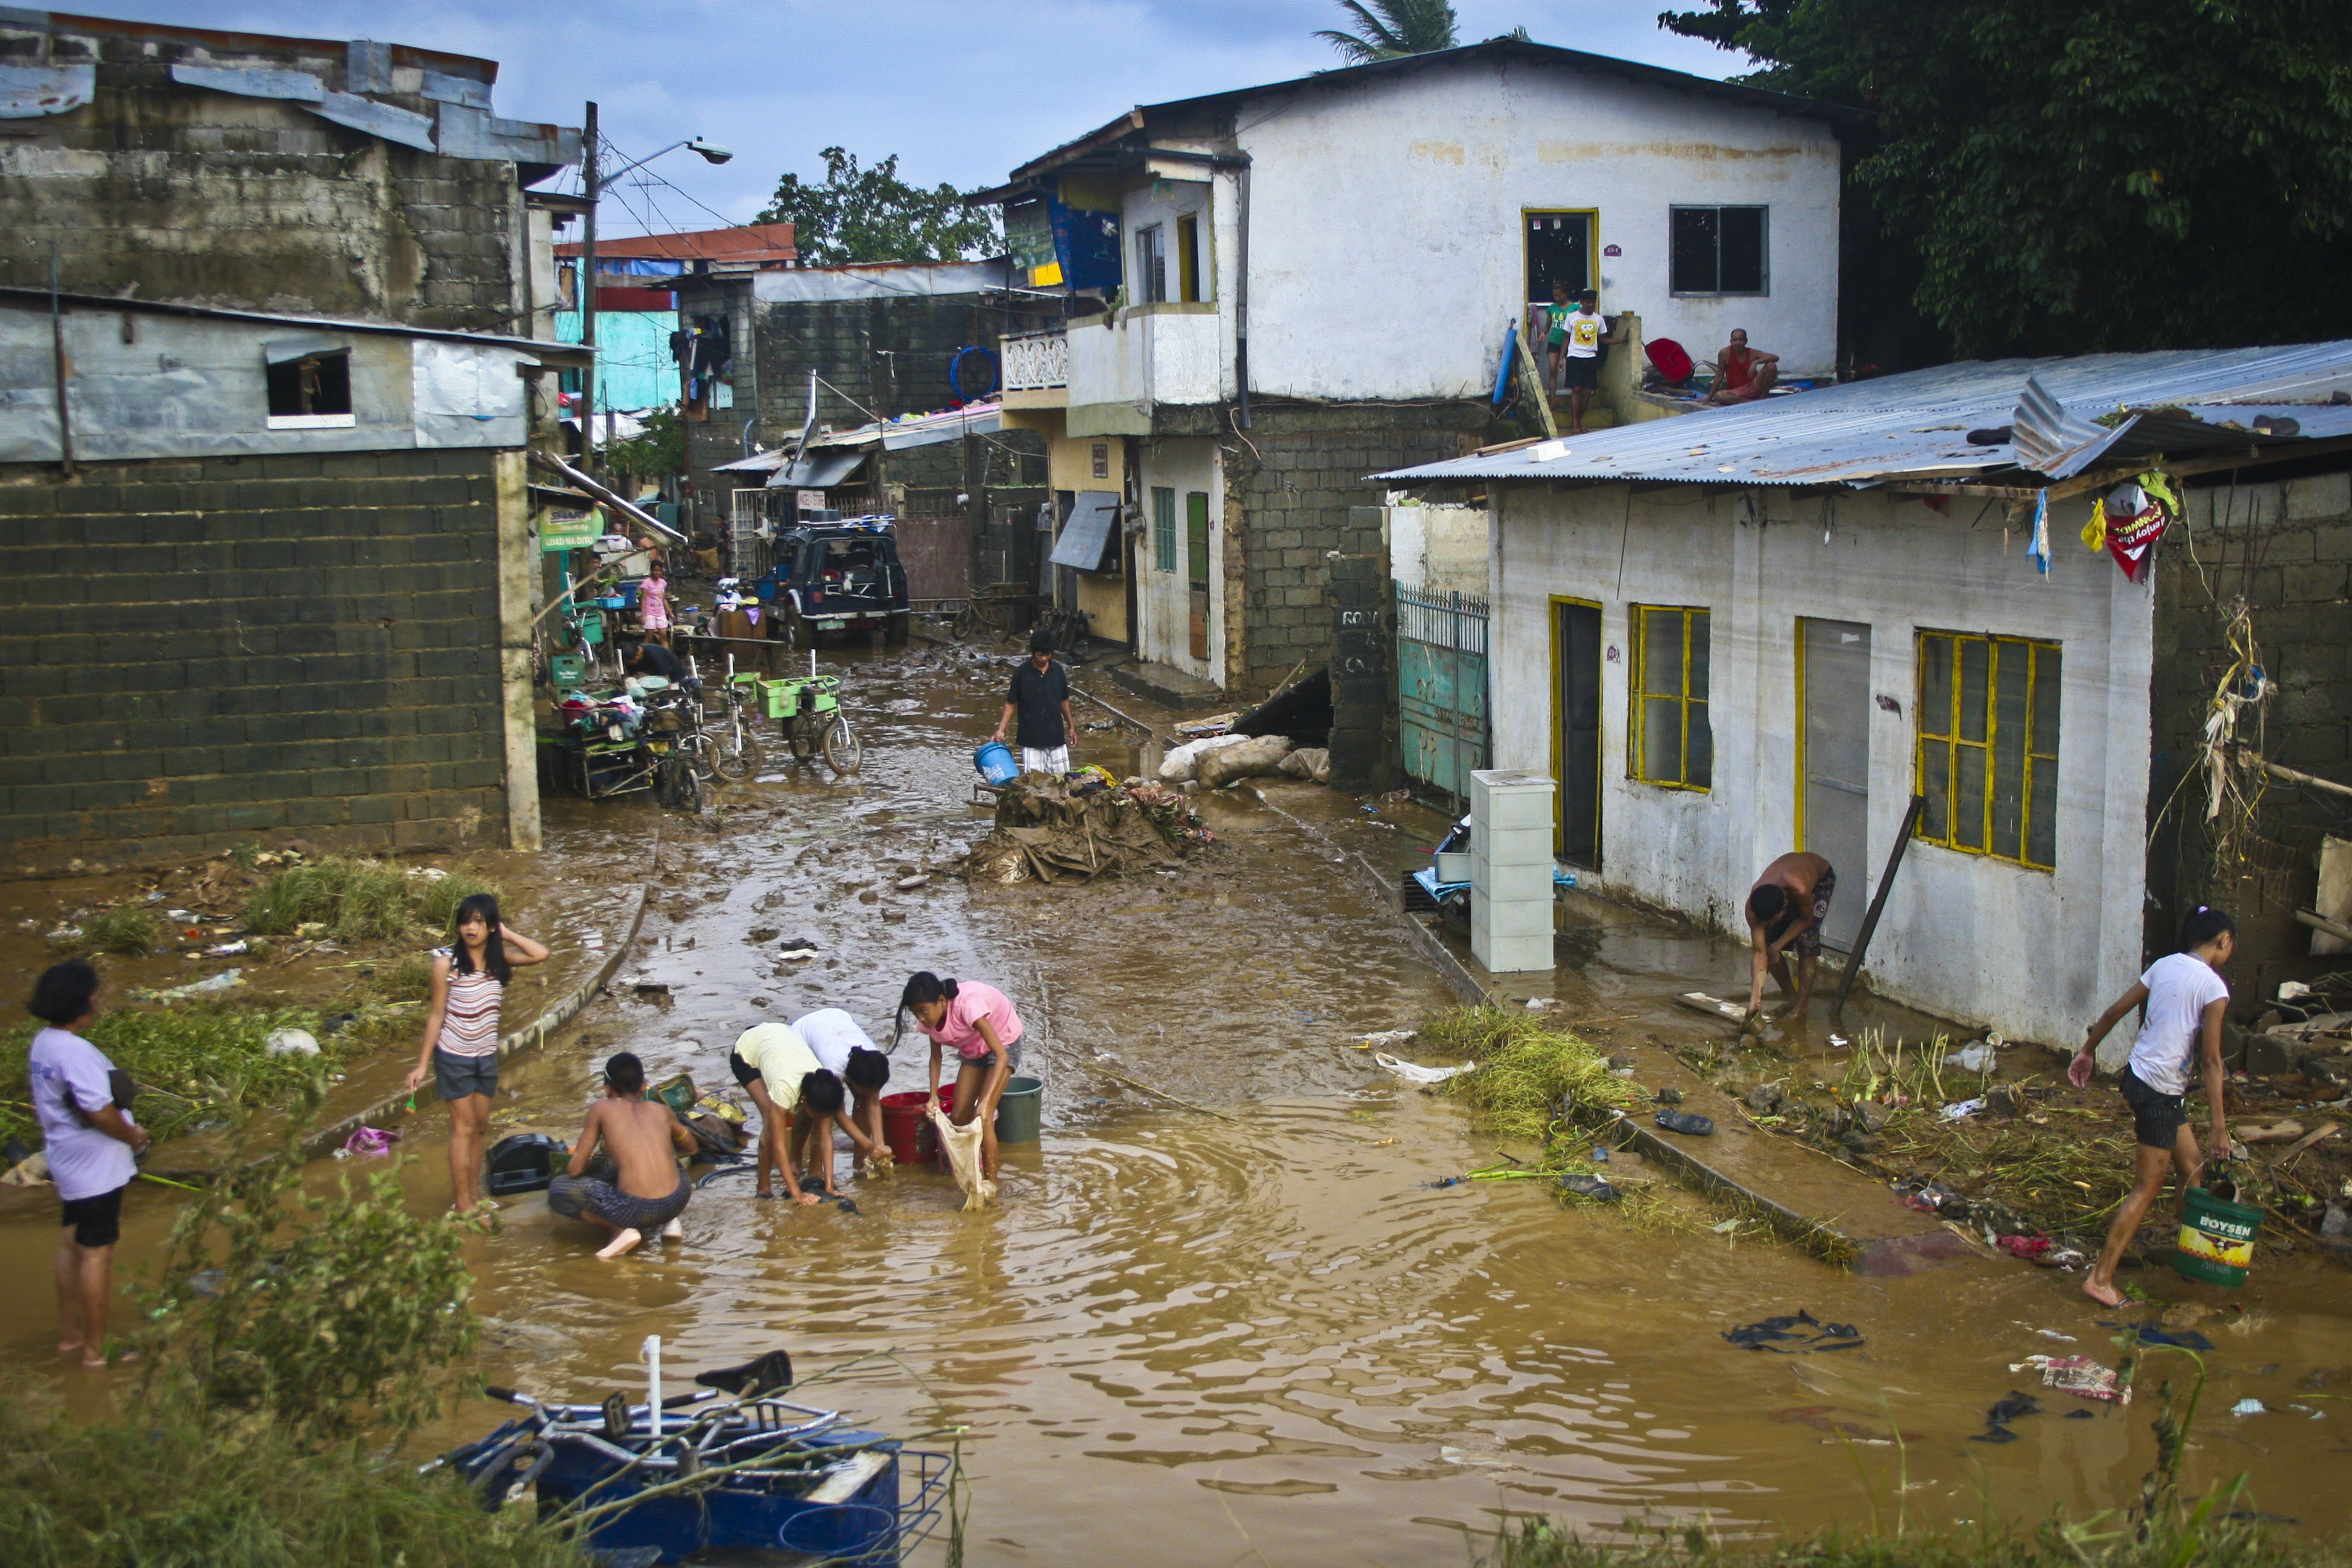 Marikina residents go about their daily routine despite the flood. Photo by LUIS LIWANAG.